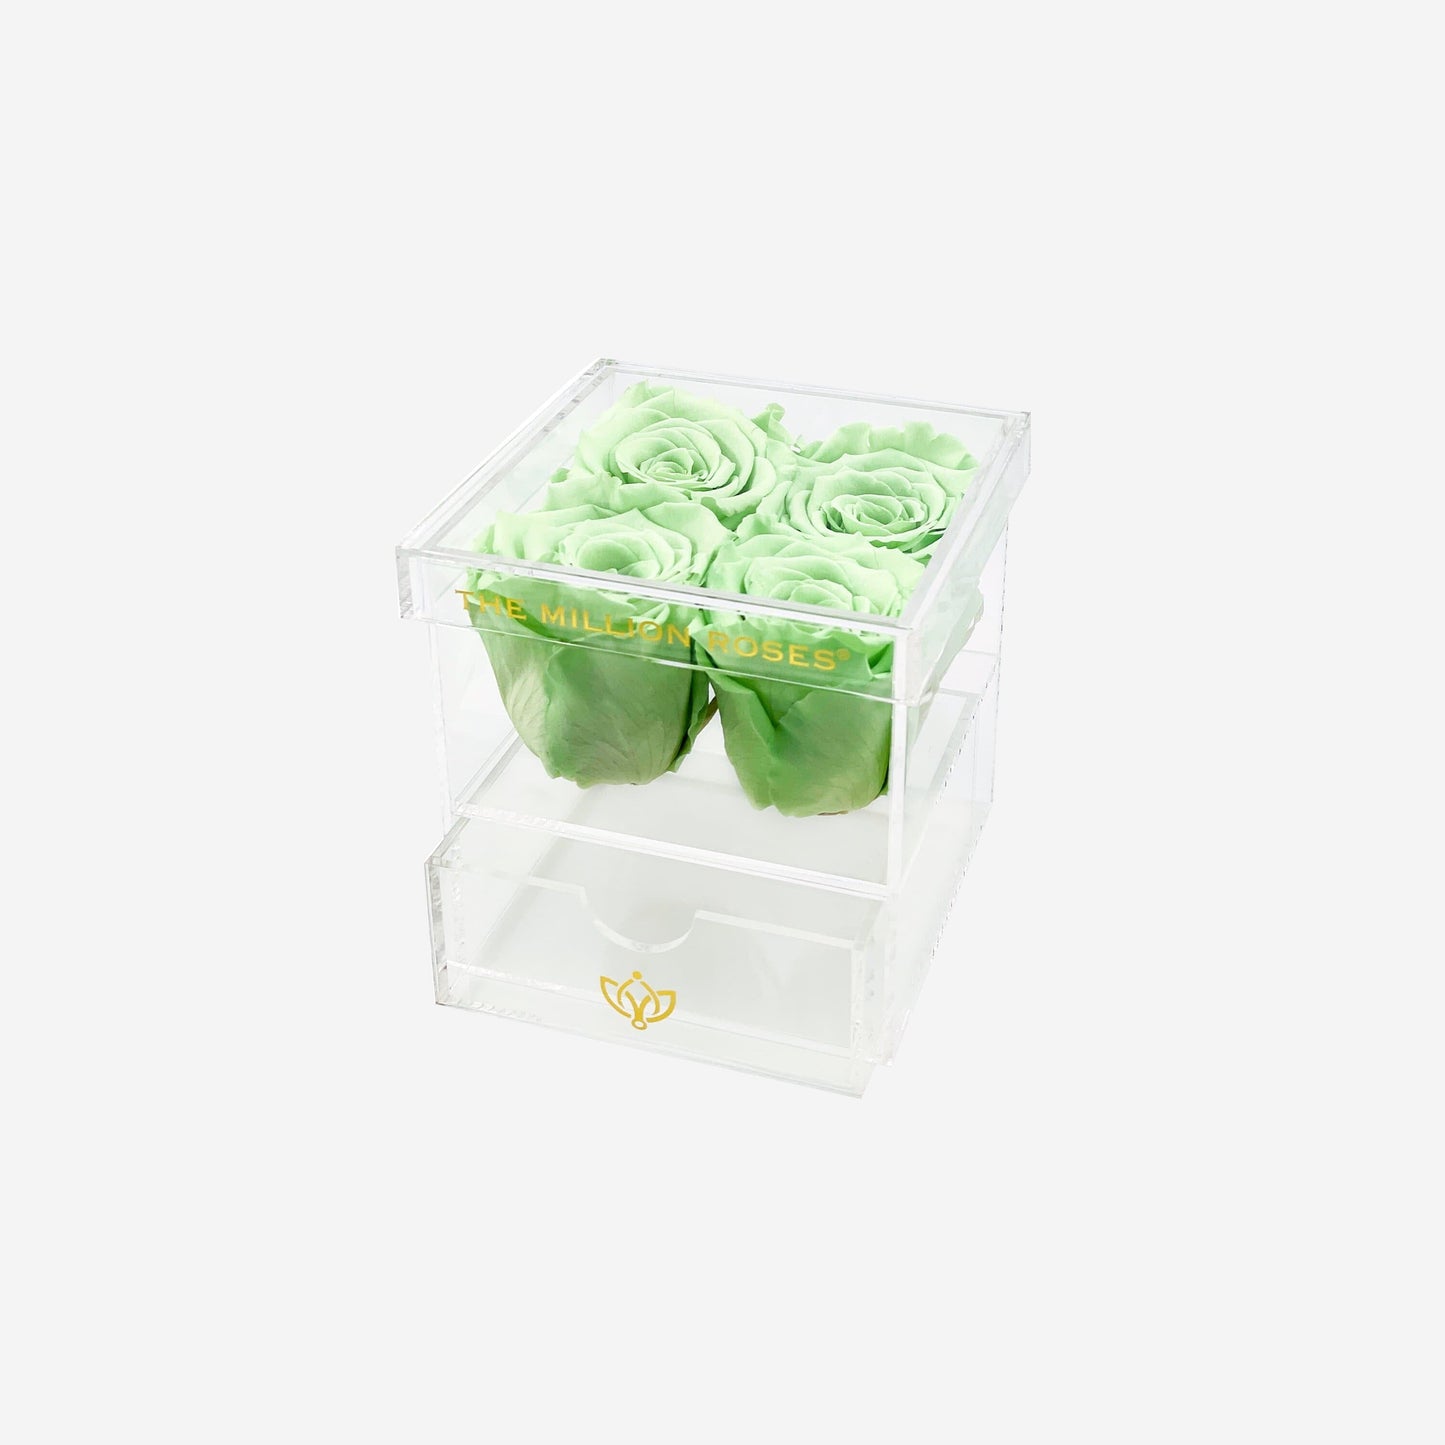 Acrylic 4 Drawer Box | Mint Green Roses - The Million Roses